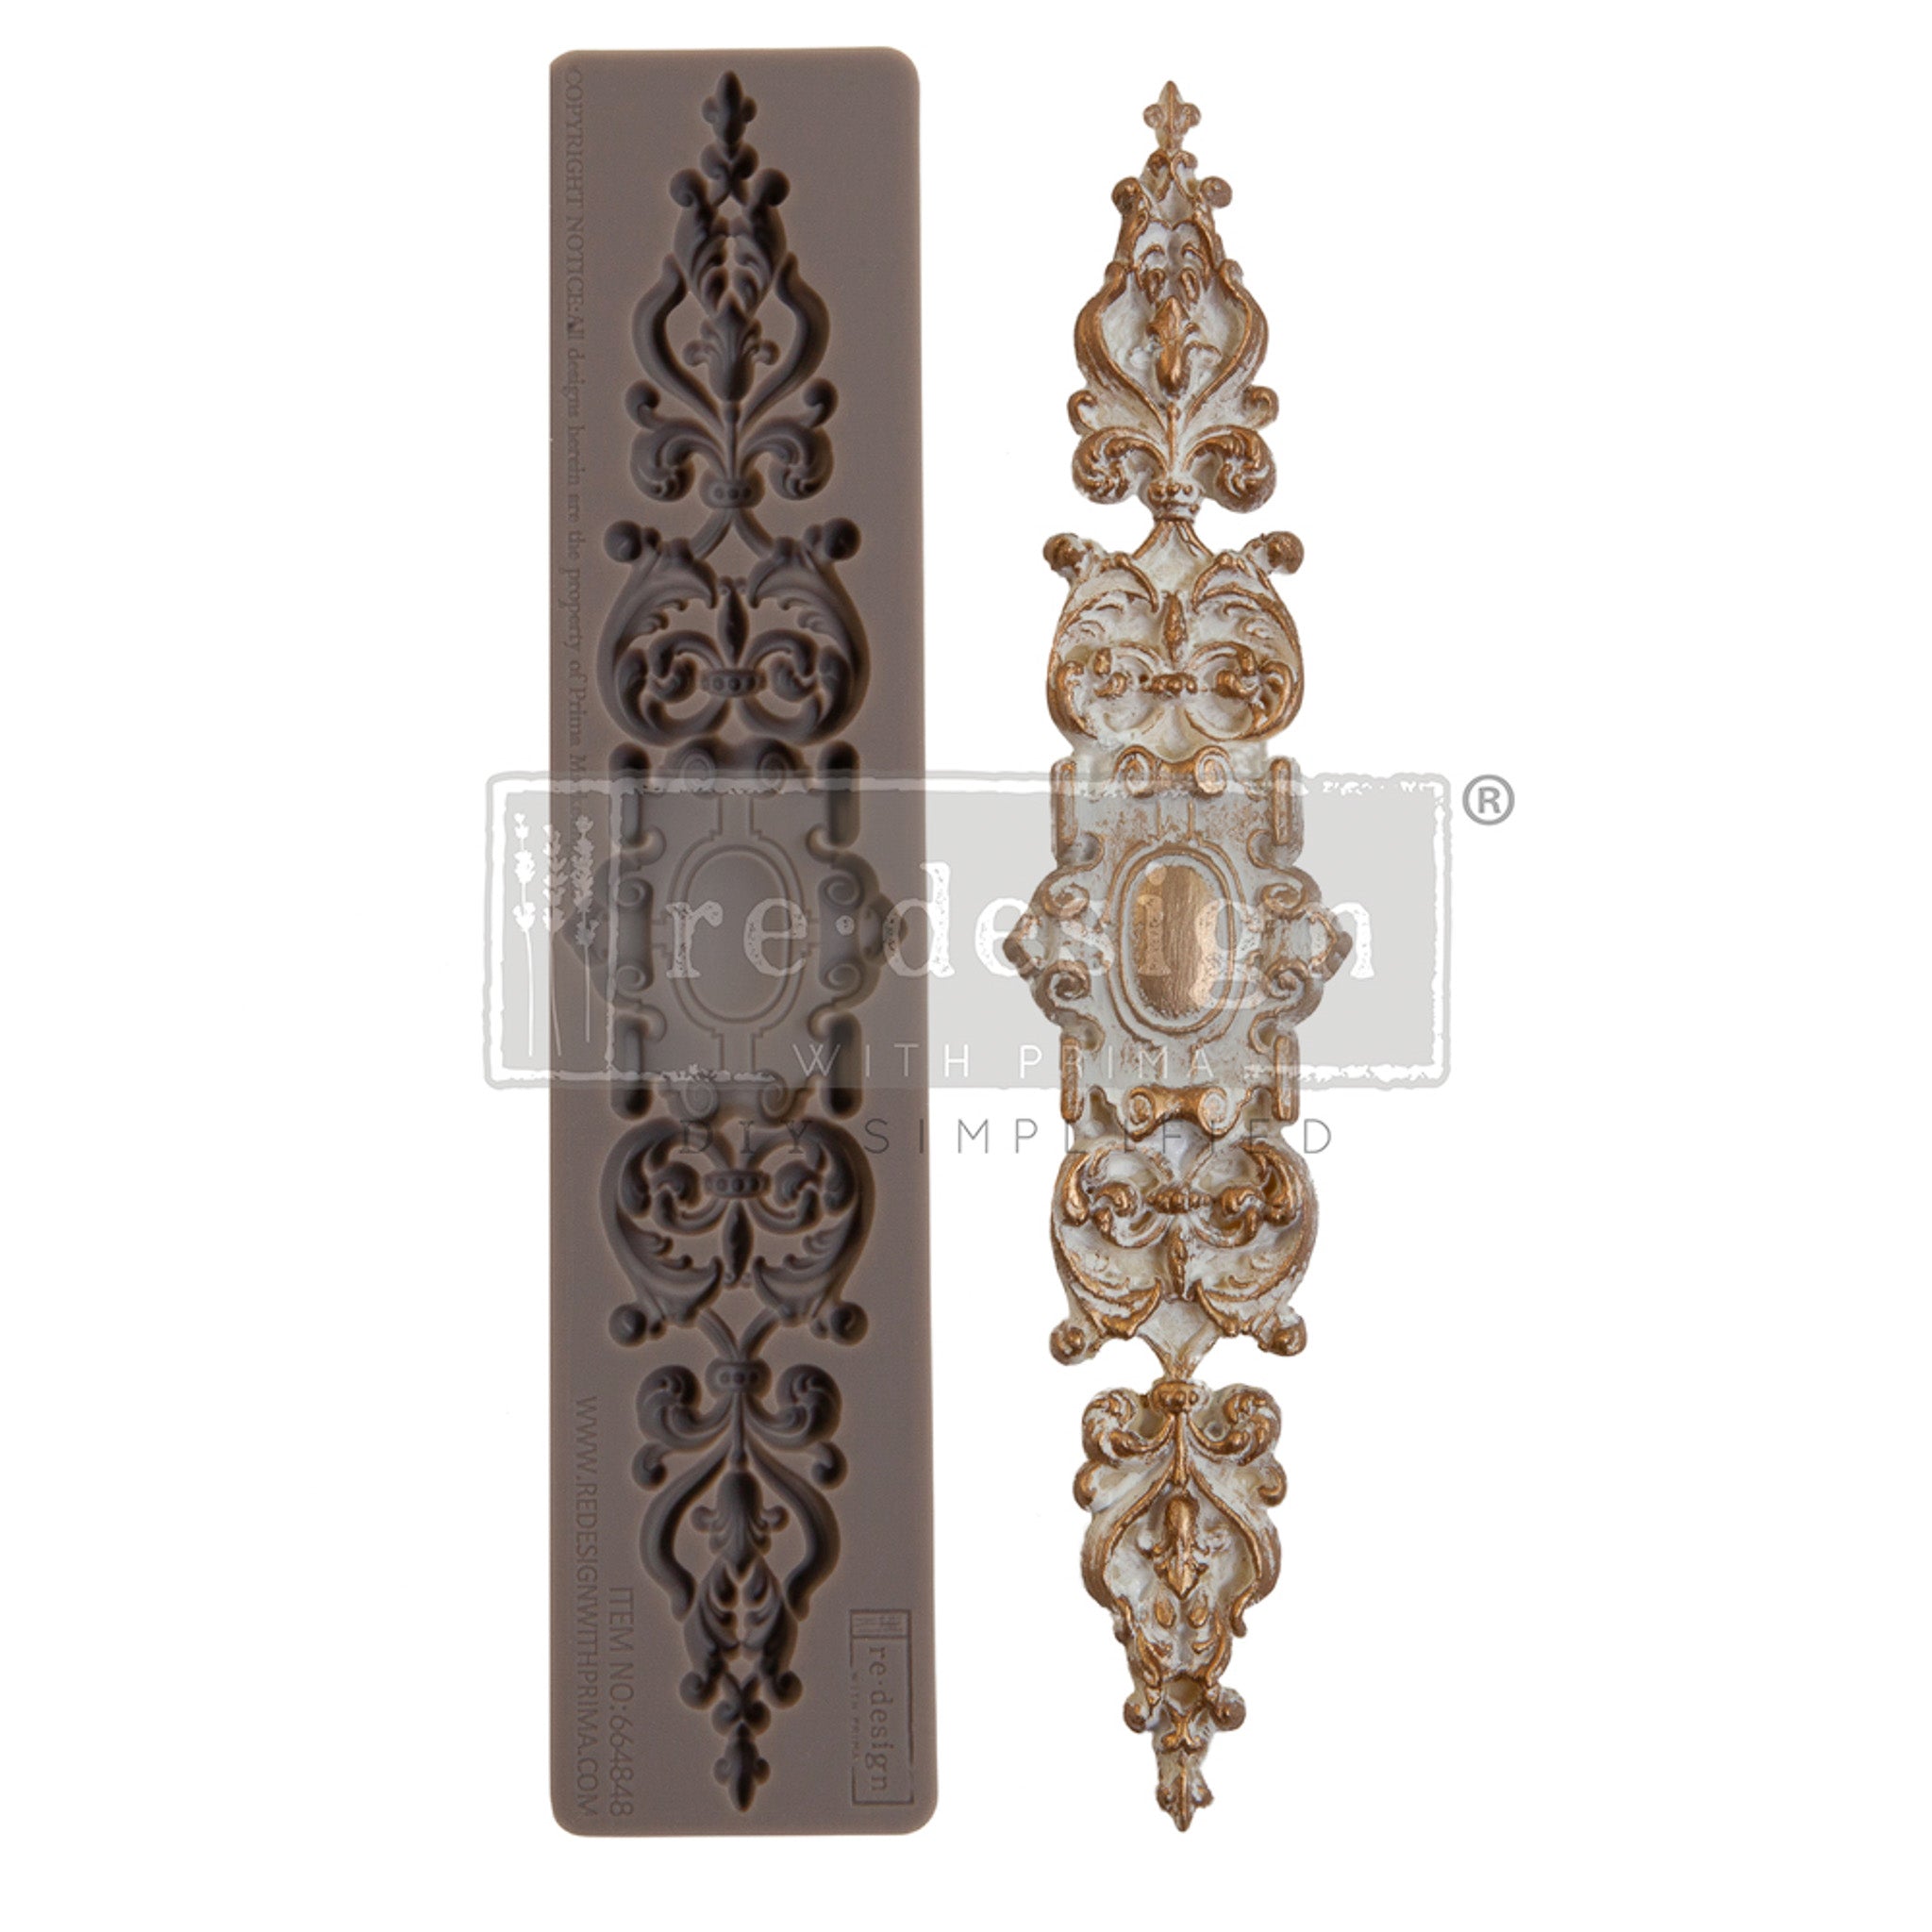 A brown silicone mould and a gold/white colored casting of an ornate accent plate are against a white background.